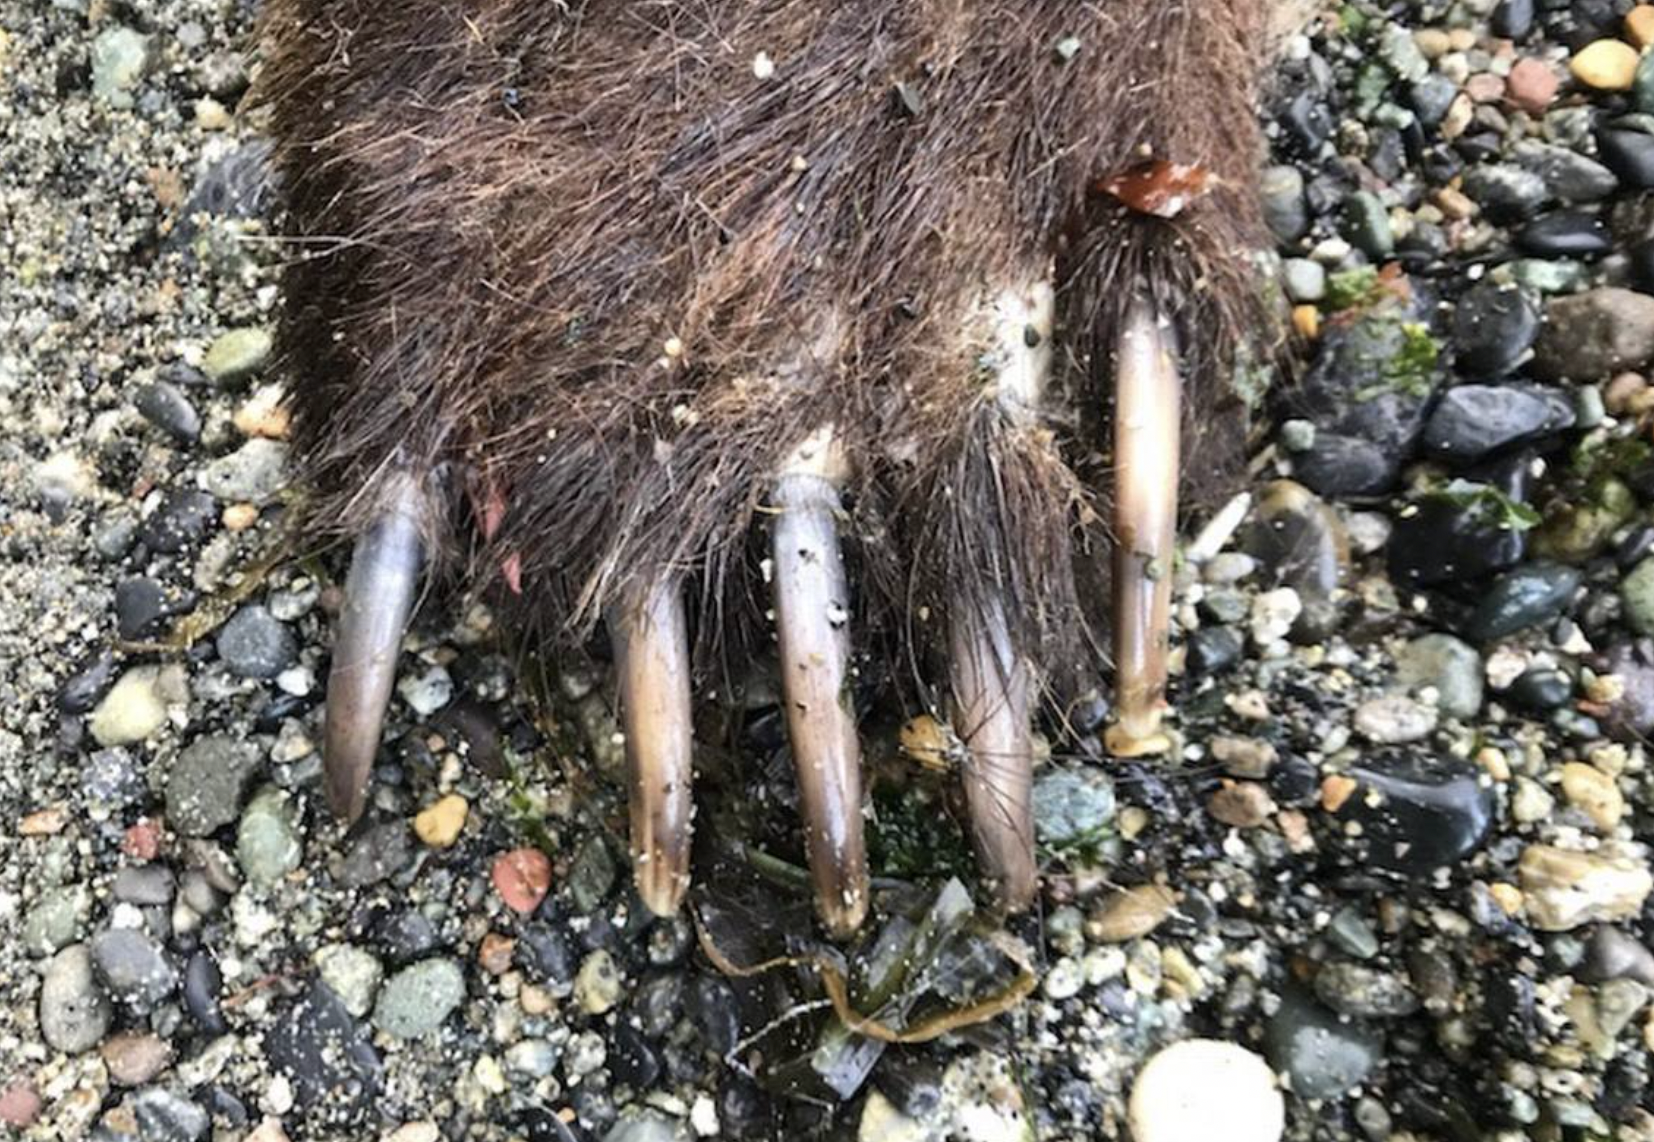 Grizzly claw from decaying bear in Washington.